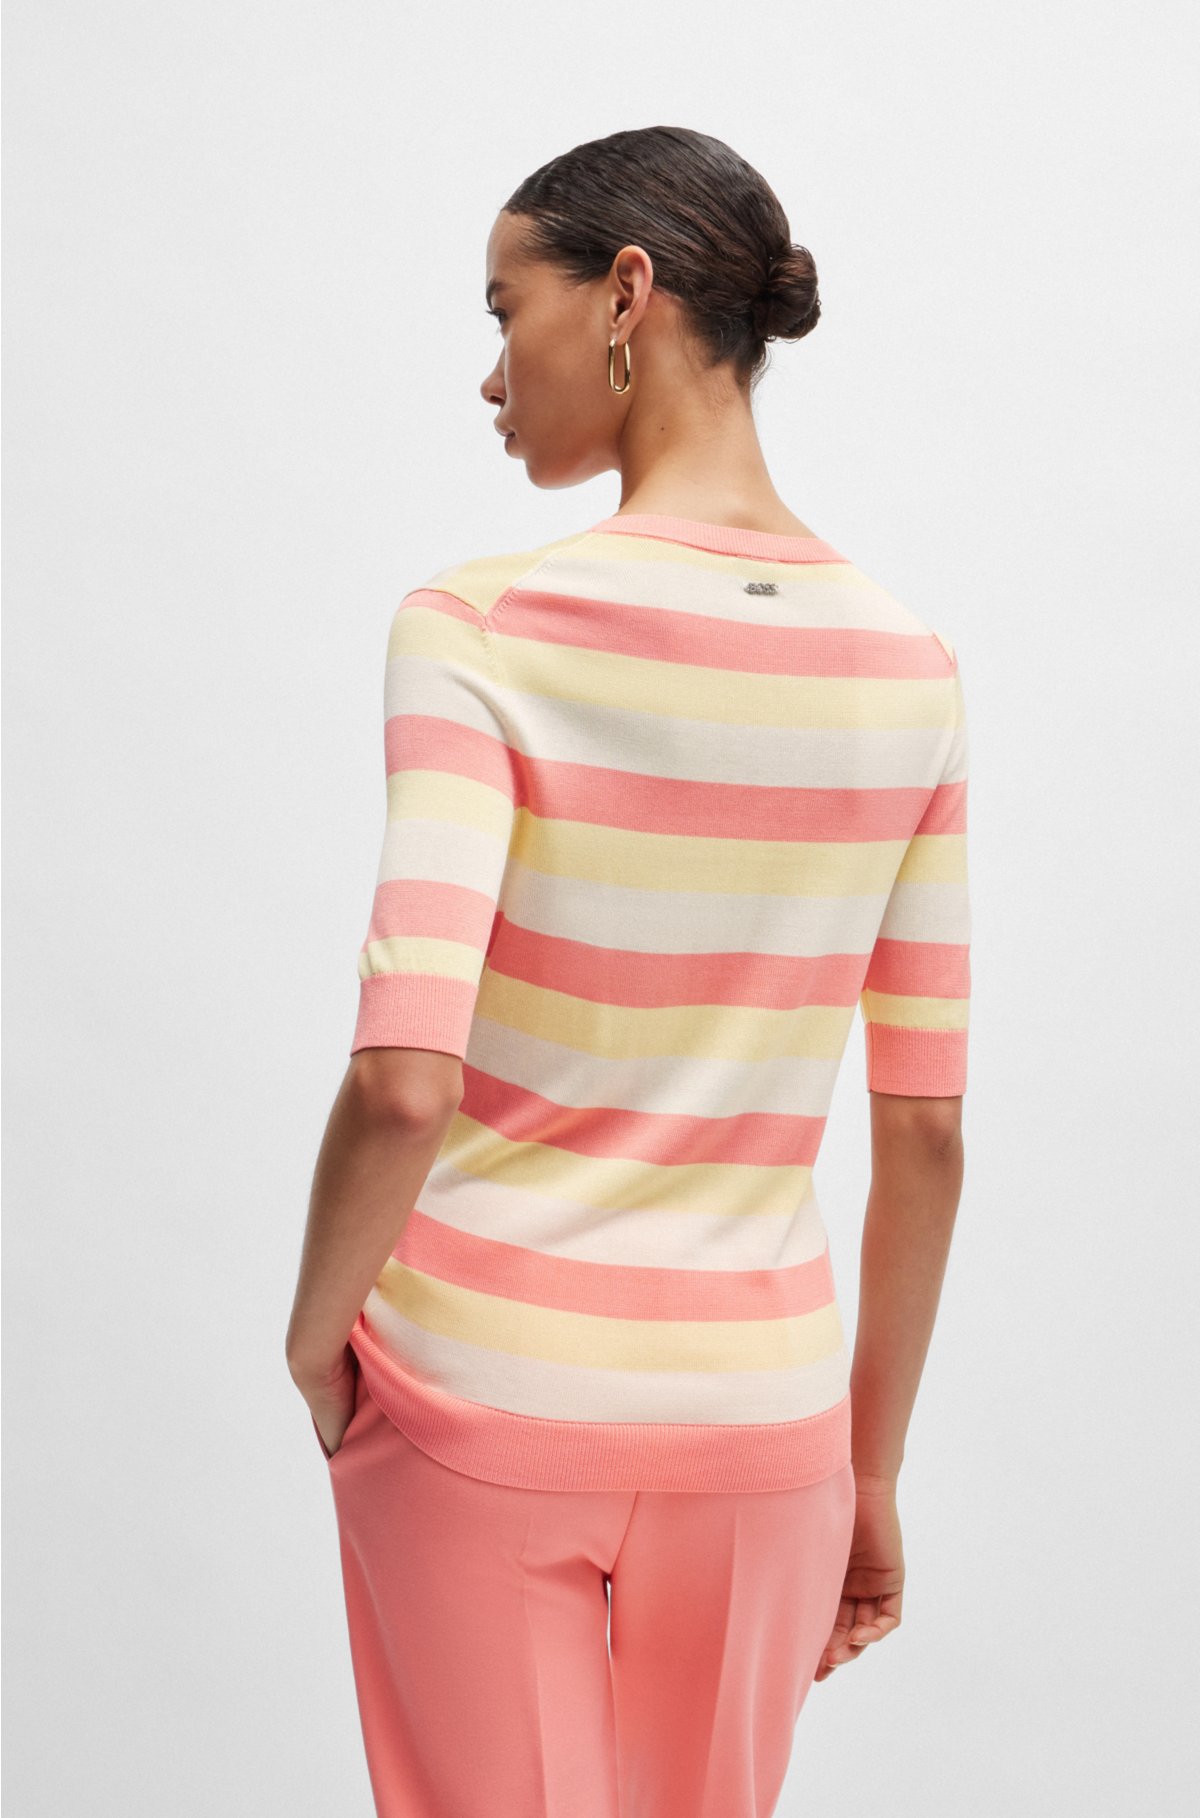 Cropped-sleeve sweater with horizontal stripes, Patterned